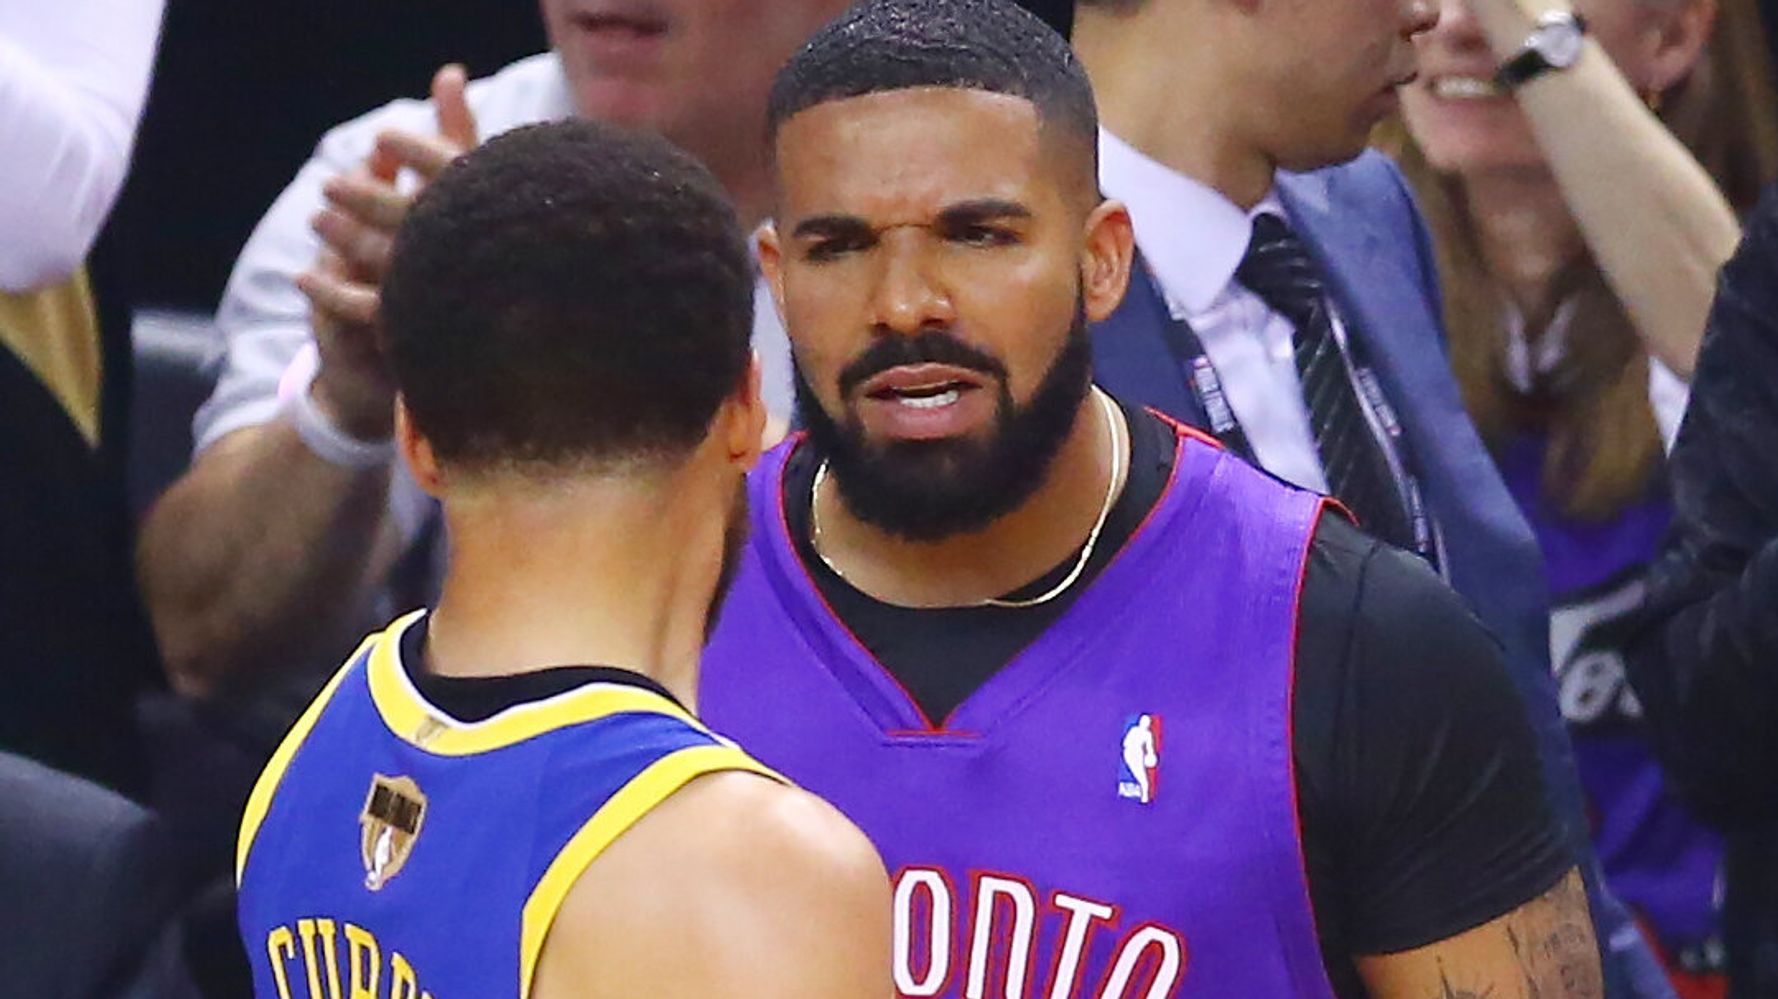 Video: Drake trolls Warriors with Dell Curry Raptors jersey